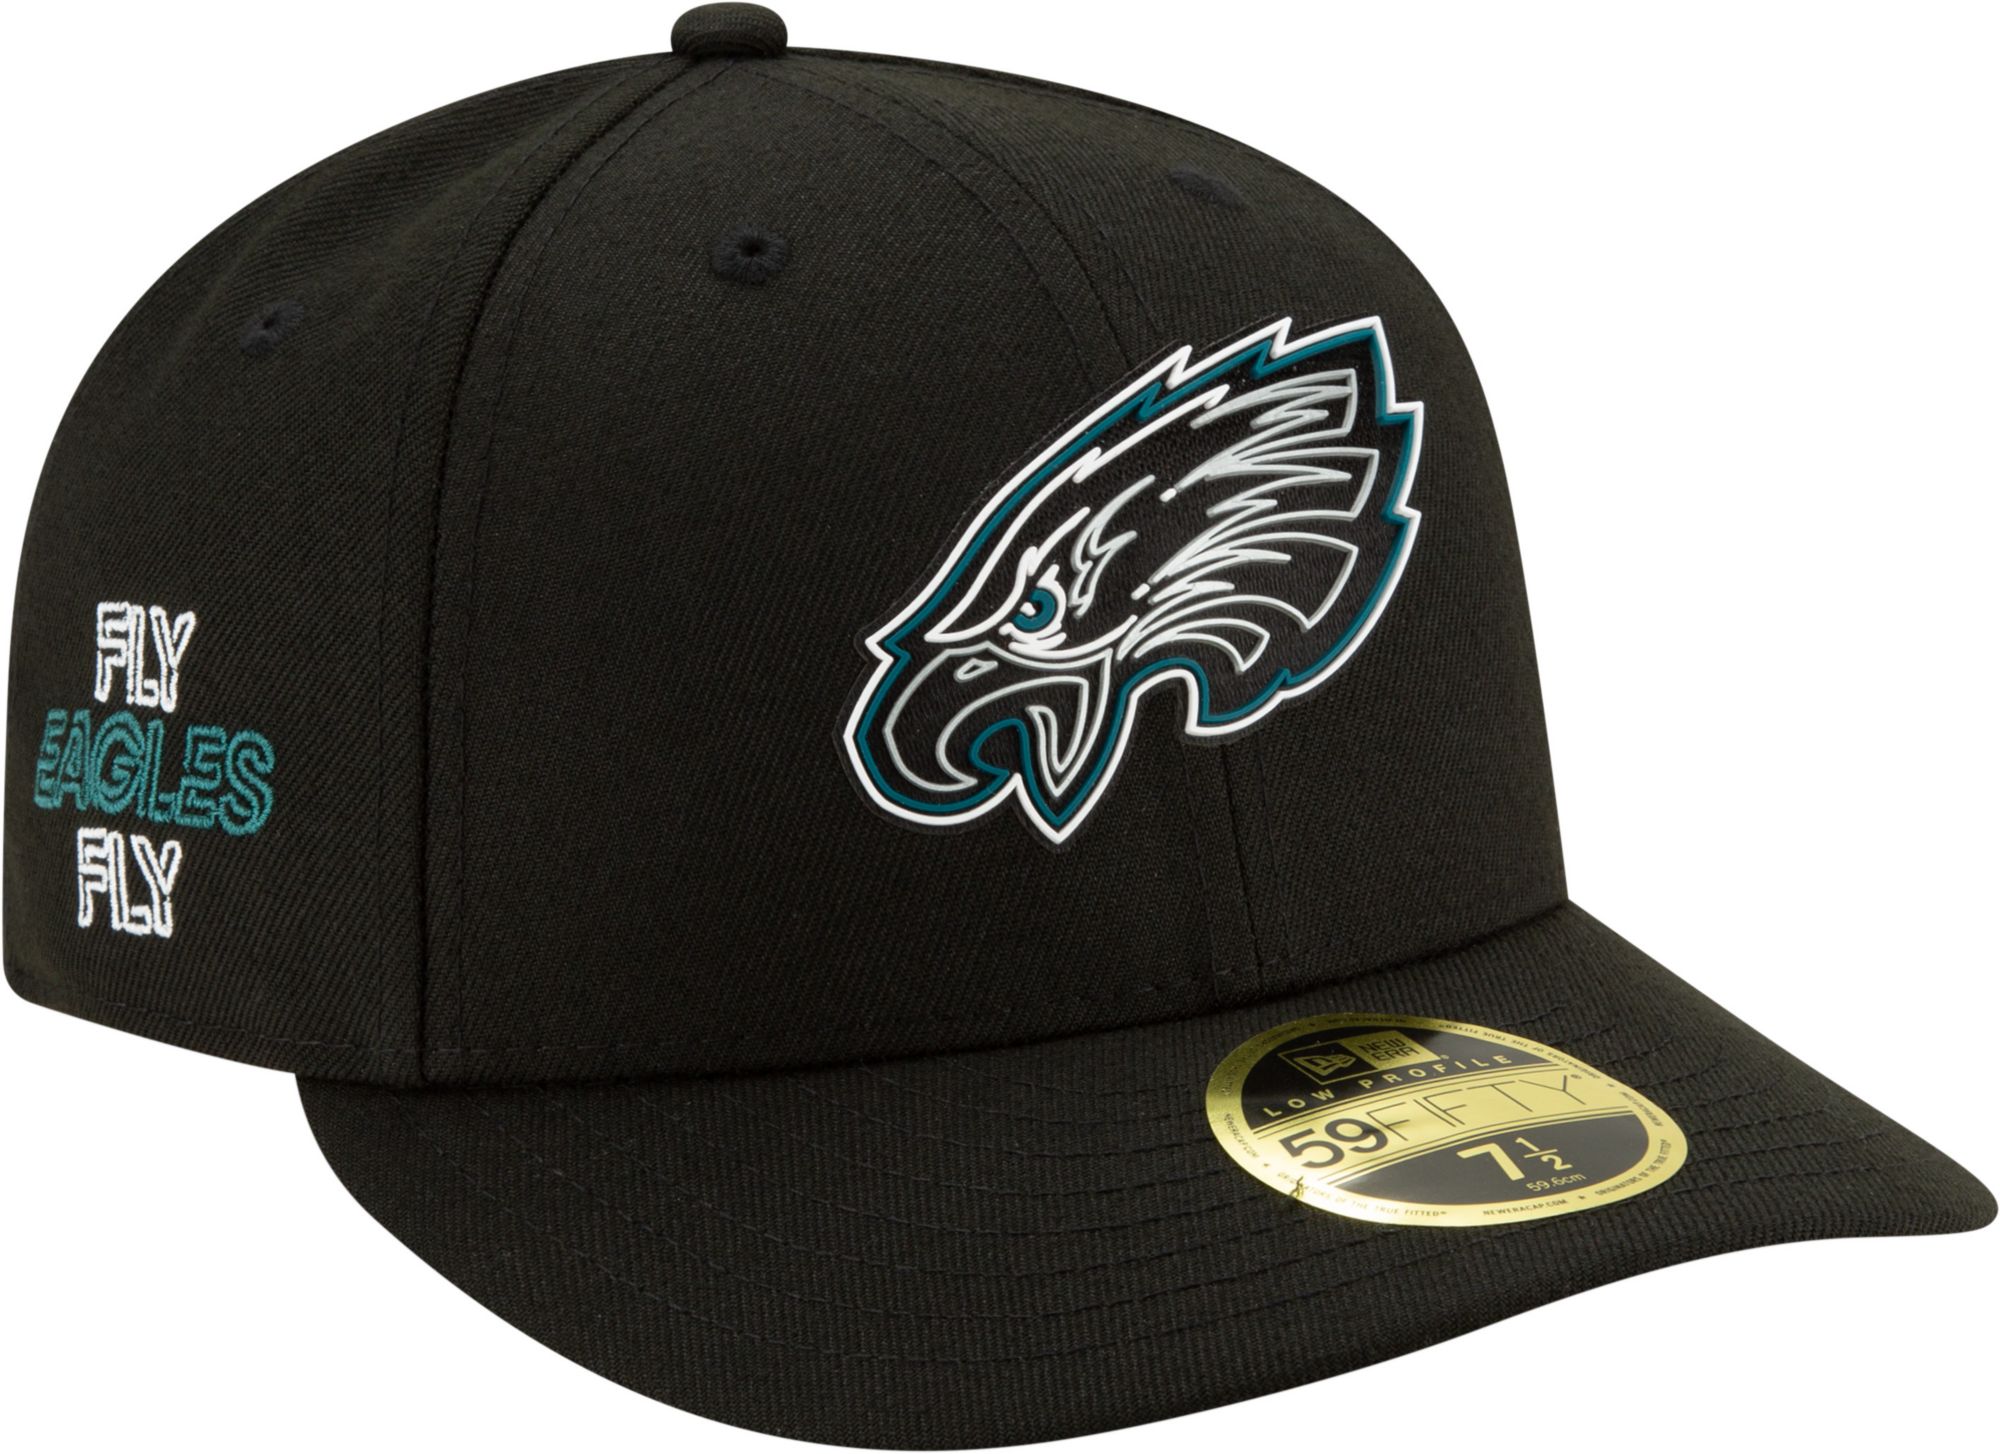 2020 NFL Draft 59Fifty Fitted Black Hat 